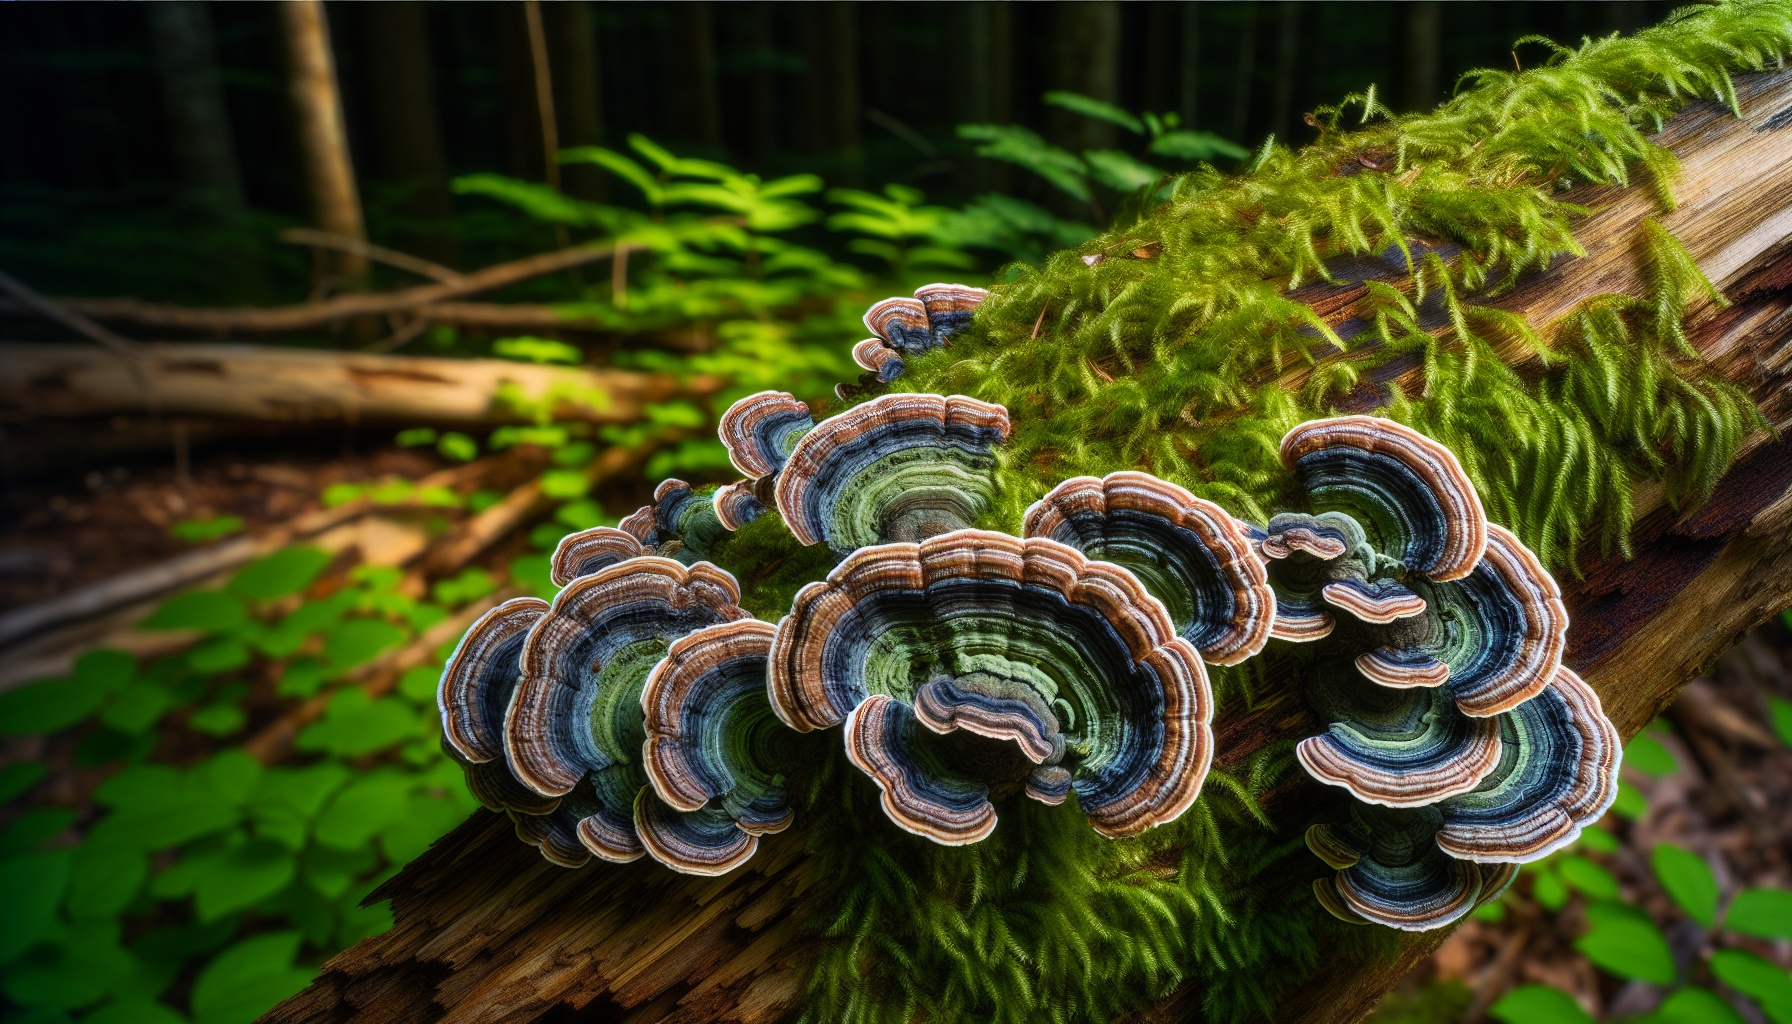 Turkey tail mushrooms growing in a forest